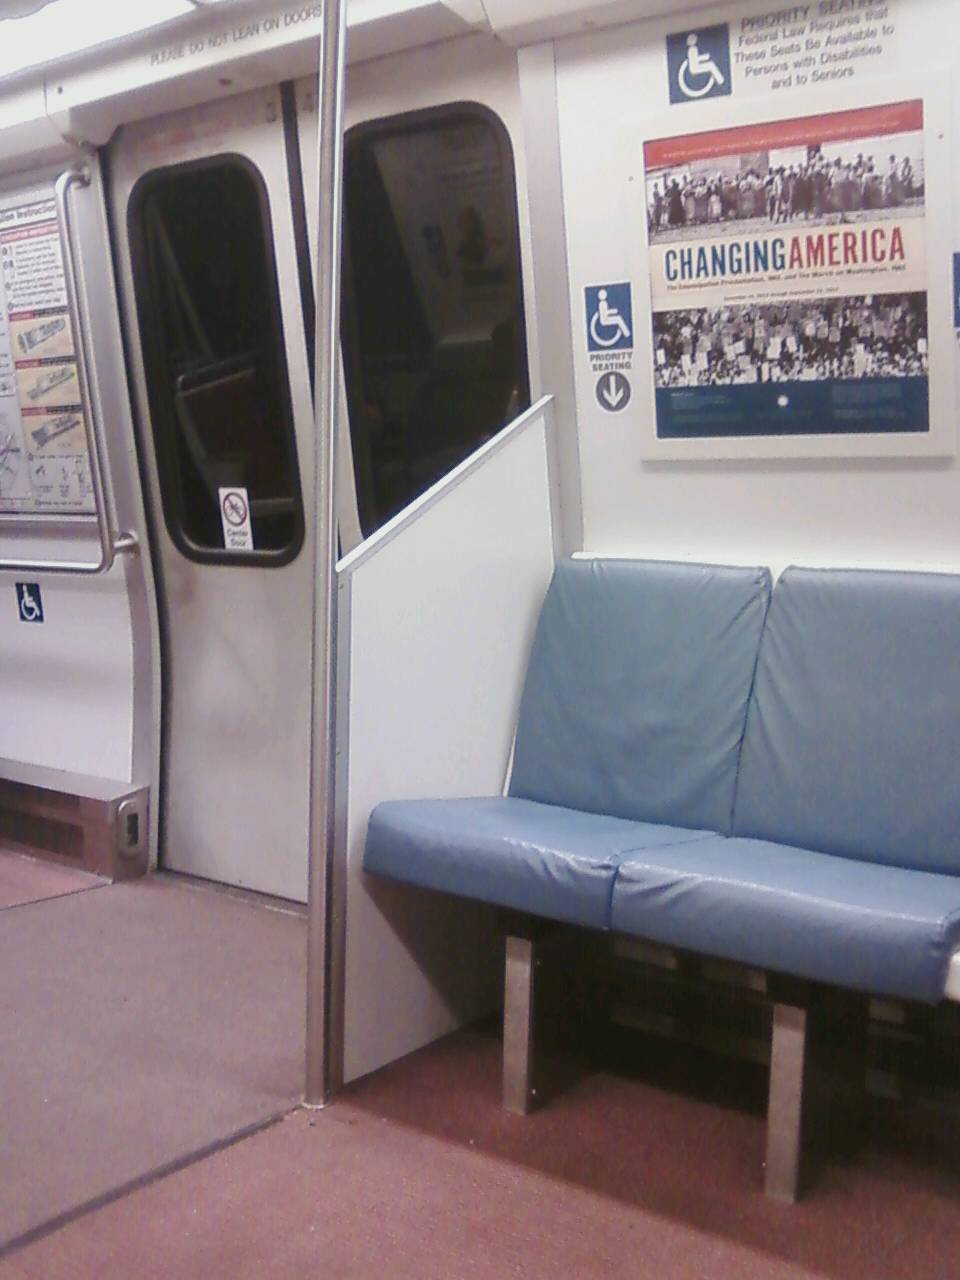 WMATA/DC Metro 6000 series car interior. Note the partition lacks the
top wind screen component. Not only does this partition not shield
passengers from outdoor elements when the train is at an outdoor station,
but passengers seated at the door (in the photos presented) will be
affected by crowding which occurs at the door as there is no effective
partition between standing and exiting/entering passengers and the seated
passengers. For further details, please visit www.wirelessnotes.org.